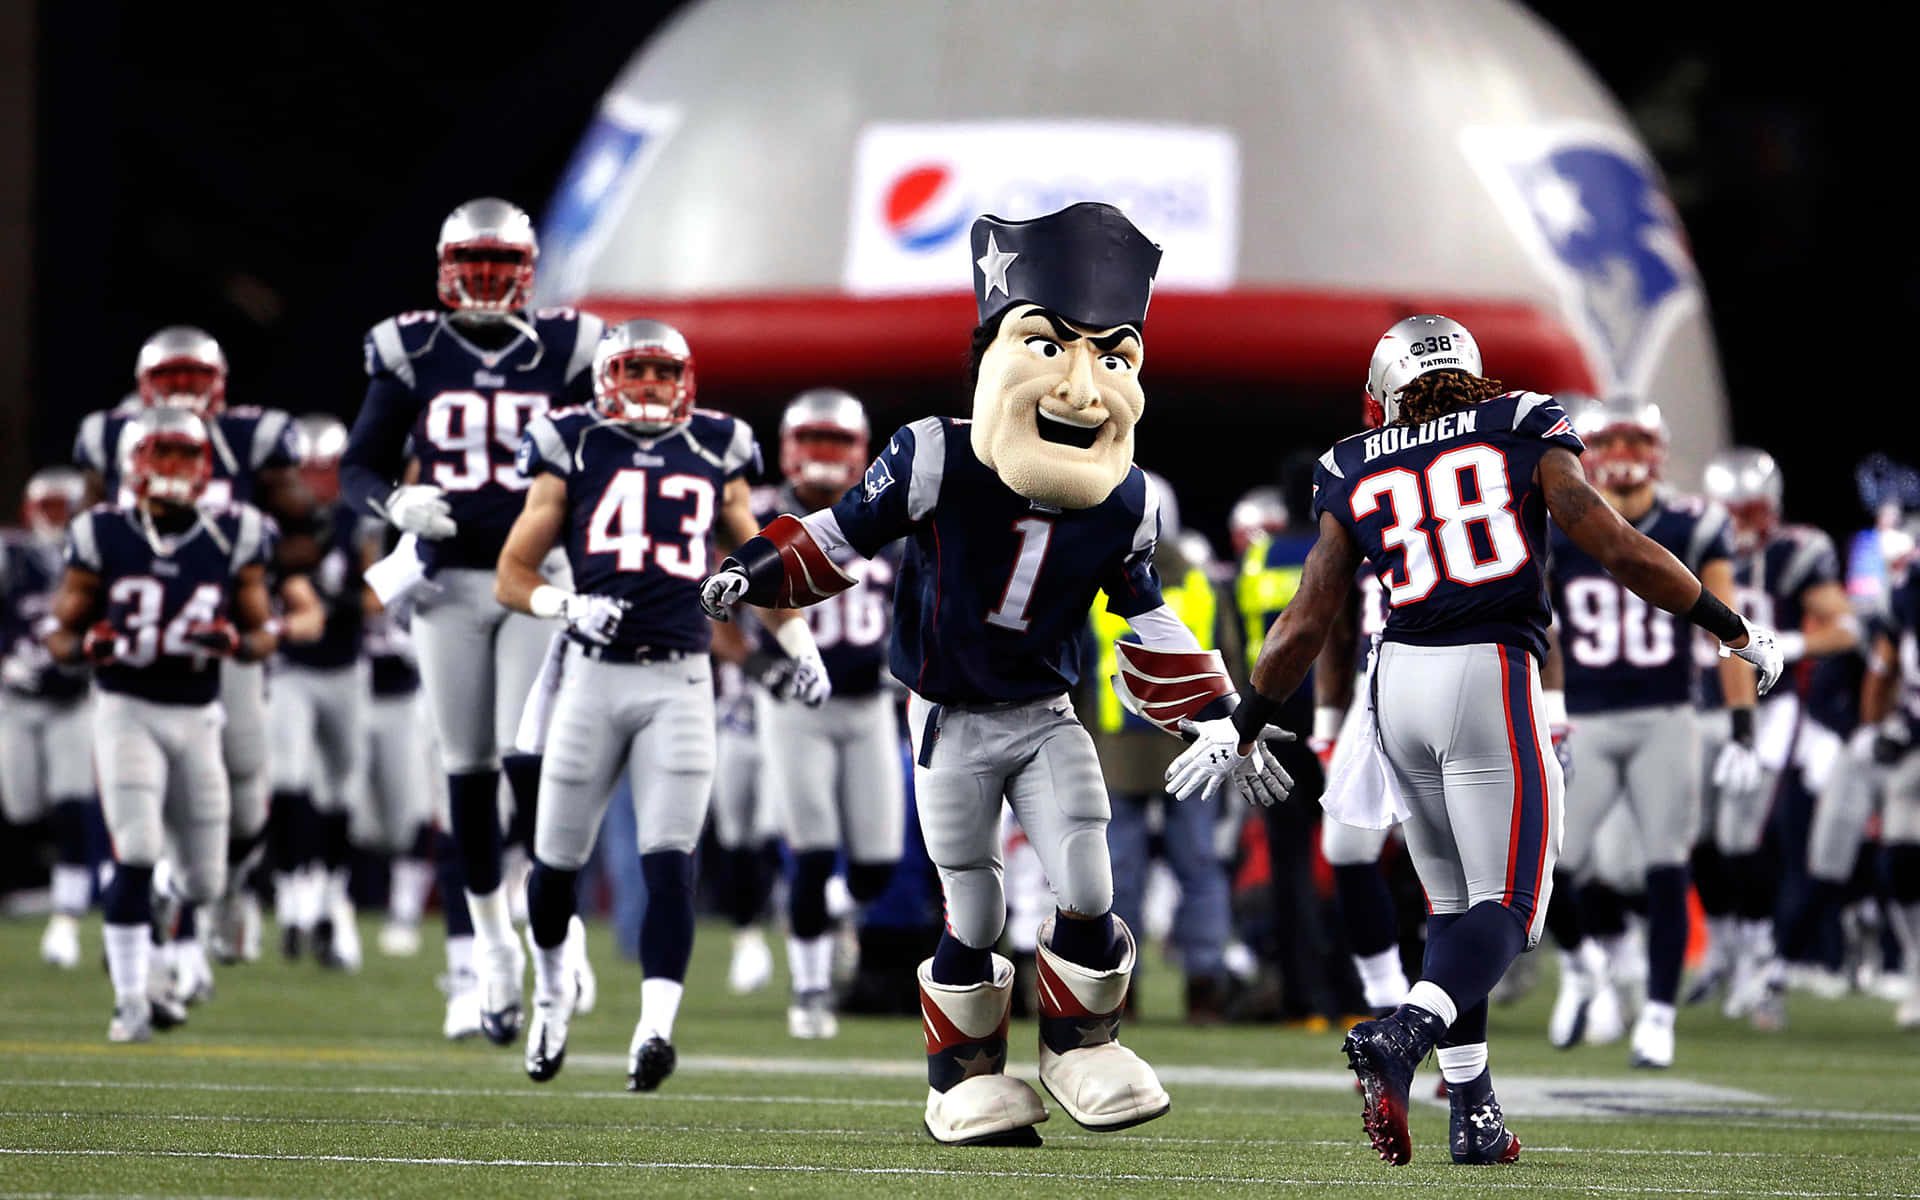 Show Your Pride With This Desktop Wallpaper Featuring The New England Patriots.